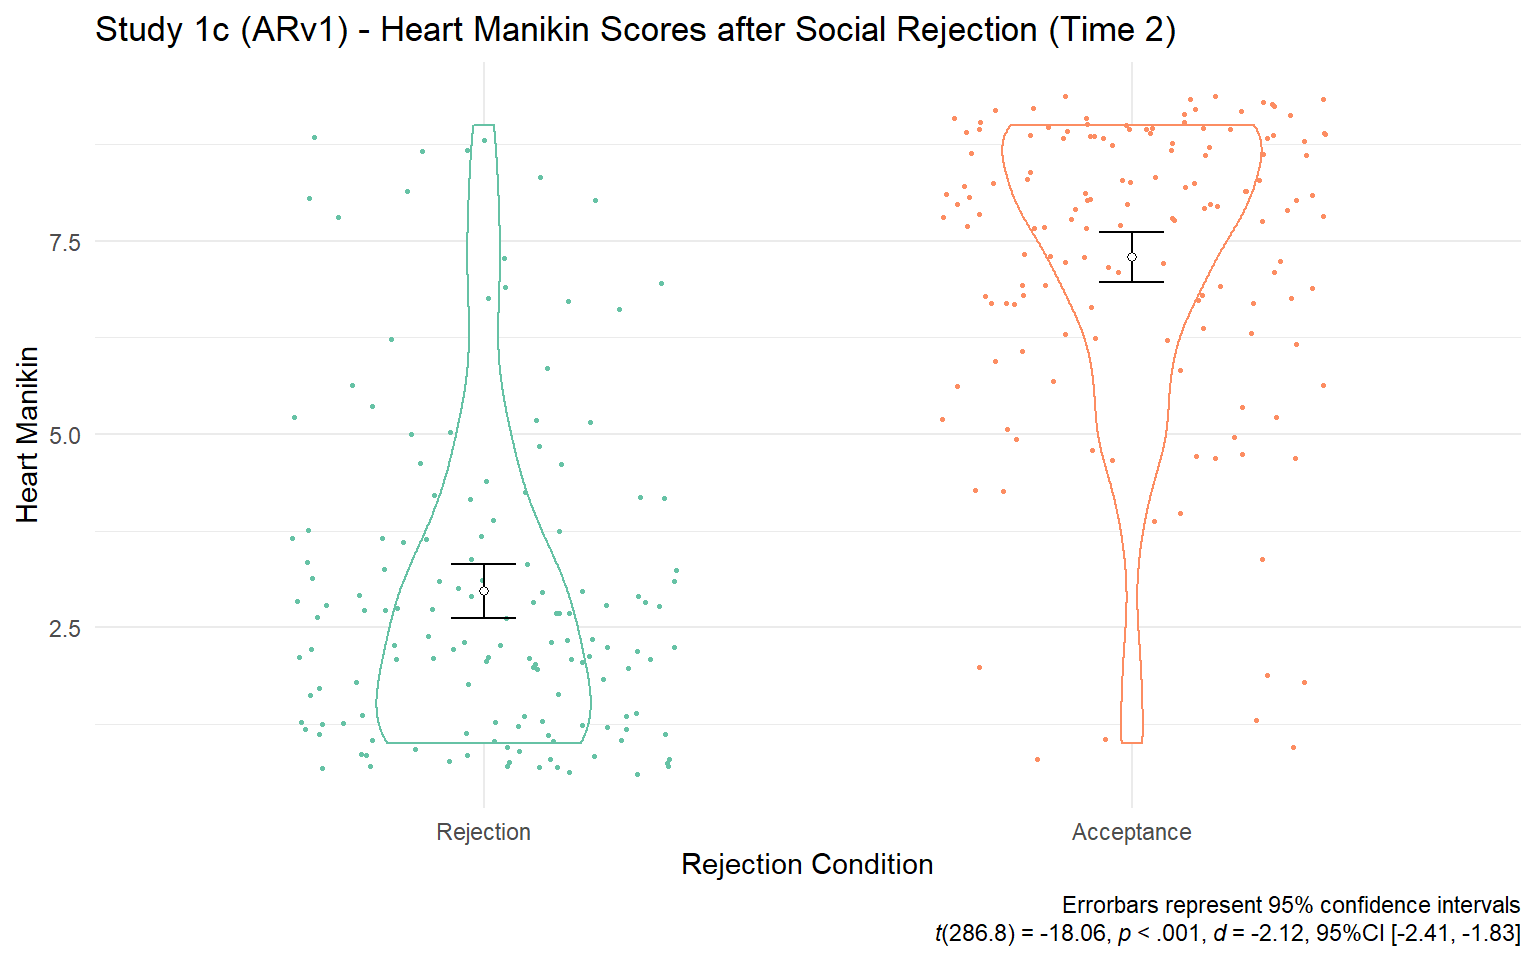 Study 1c - Heart Manikin Scores across Rejection Conditions. Participants in the rejection condition reported lower Heart Manikin scores than those in the acceptance condition.